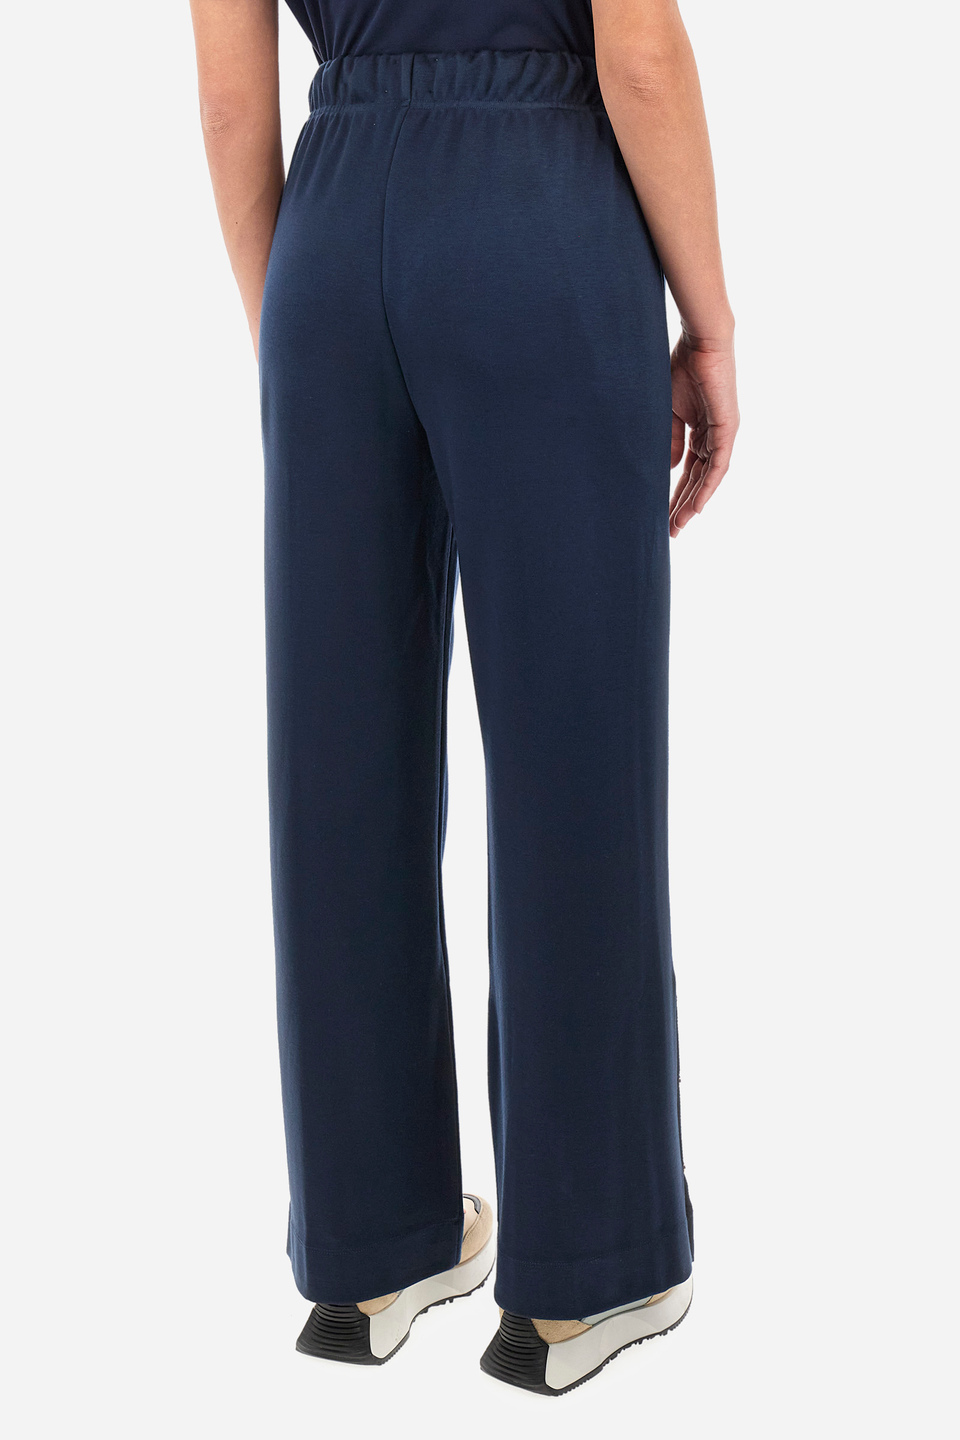 Women's regular fit trousers in a sweat fabric - Yamila | La Martina - Official Online Shop